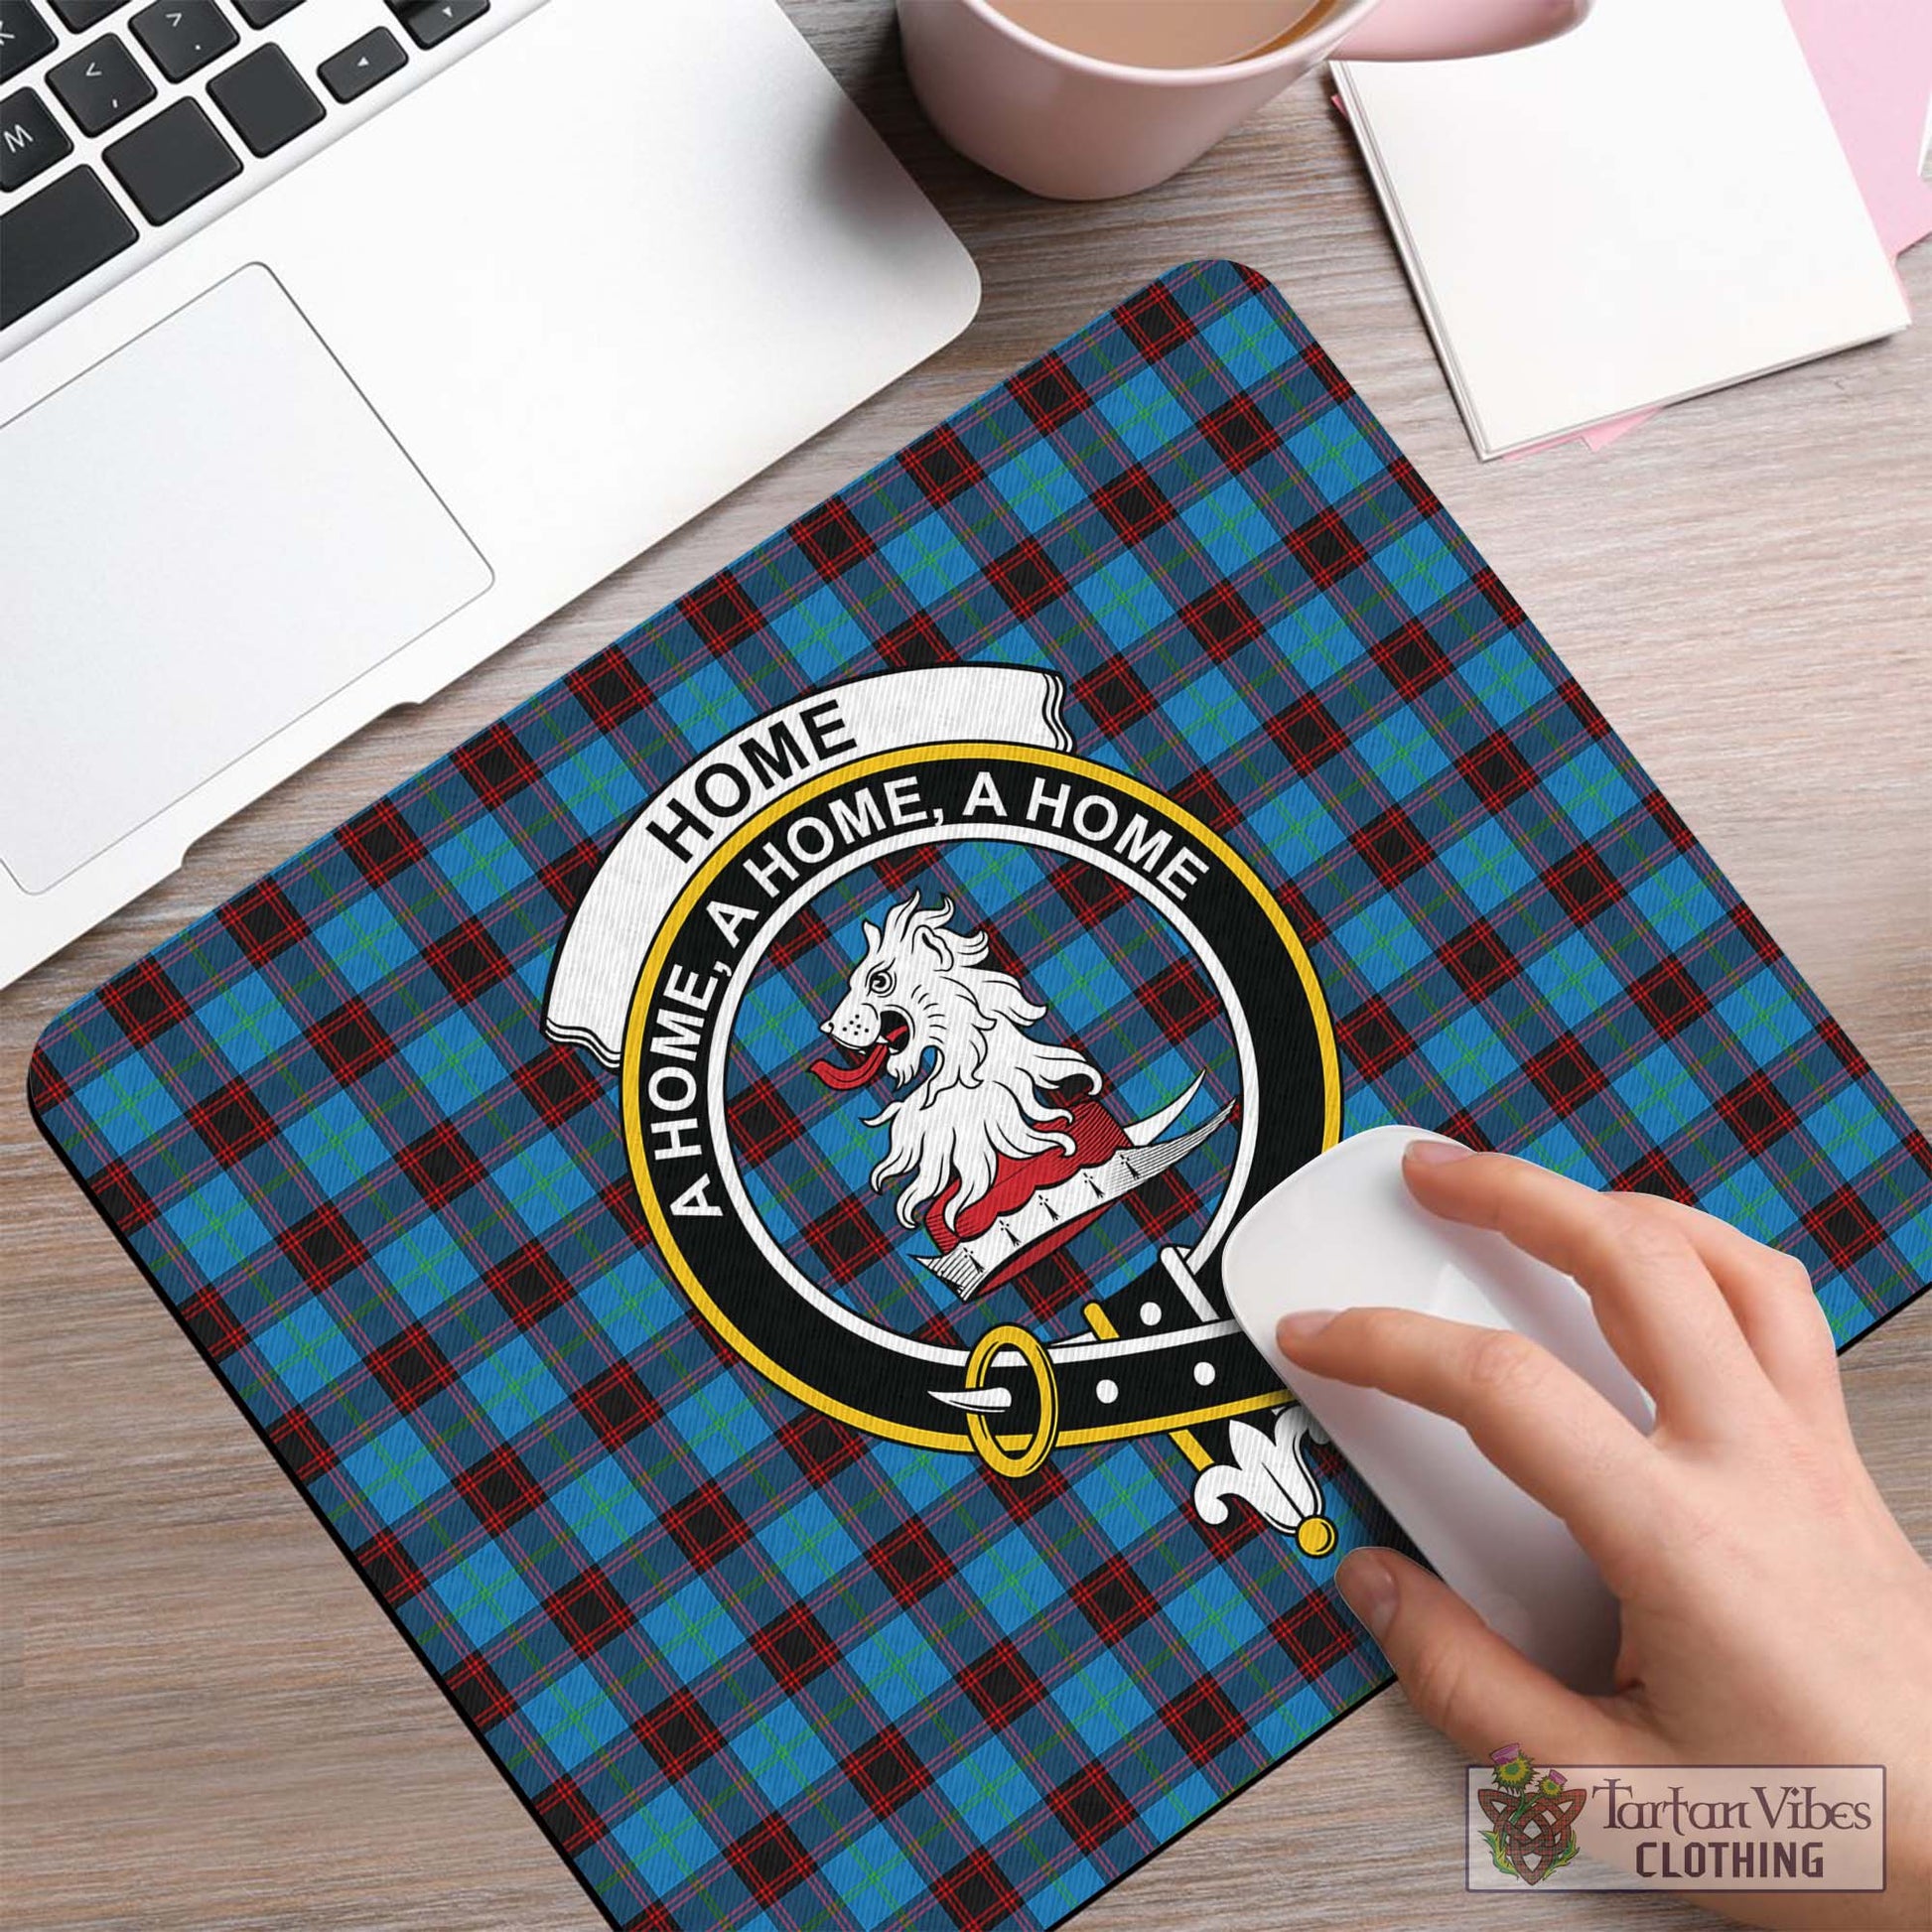 Tartan Vibes Clothing Home Ancient Tartan Mouse Pad with Family Crest